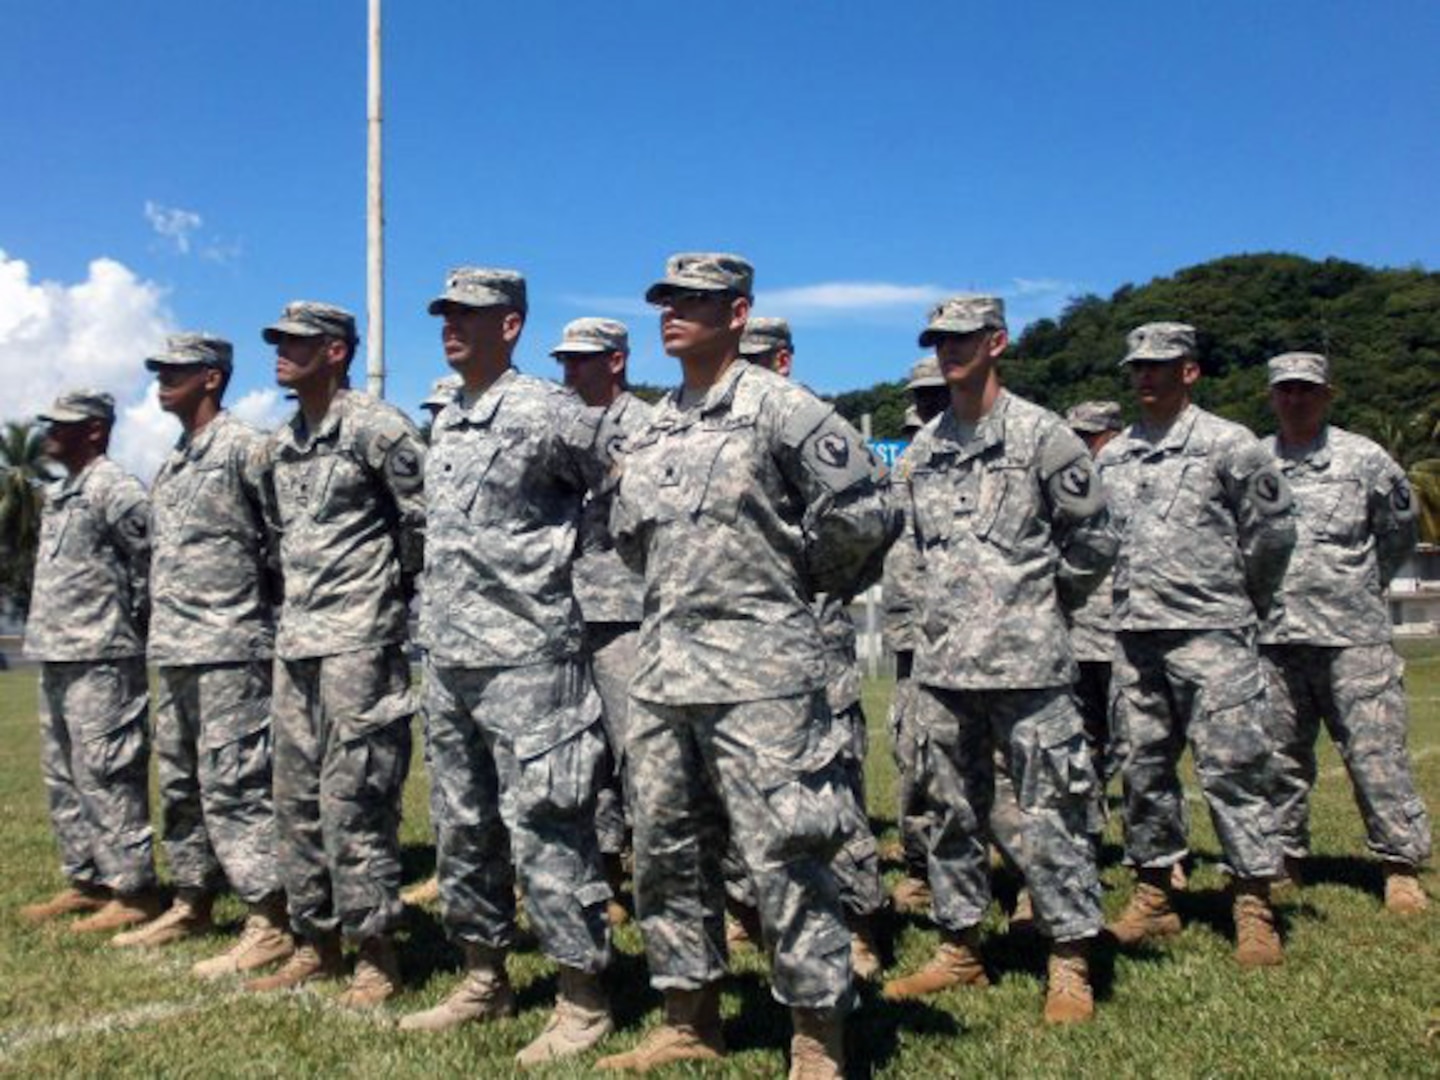 Members of the 448th Engineer Battalion, U.S. Army Reserve Puerto Rico, during a change of command ceremony at Fort Buchanan, Puerto Rico, Sept 21, 2013. Inactive and active-duty training for Army Reserve Soldiers has been cancelled during the partial government shutdown.